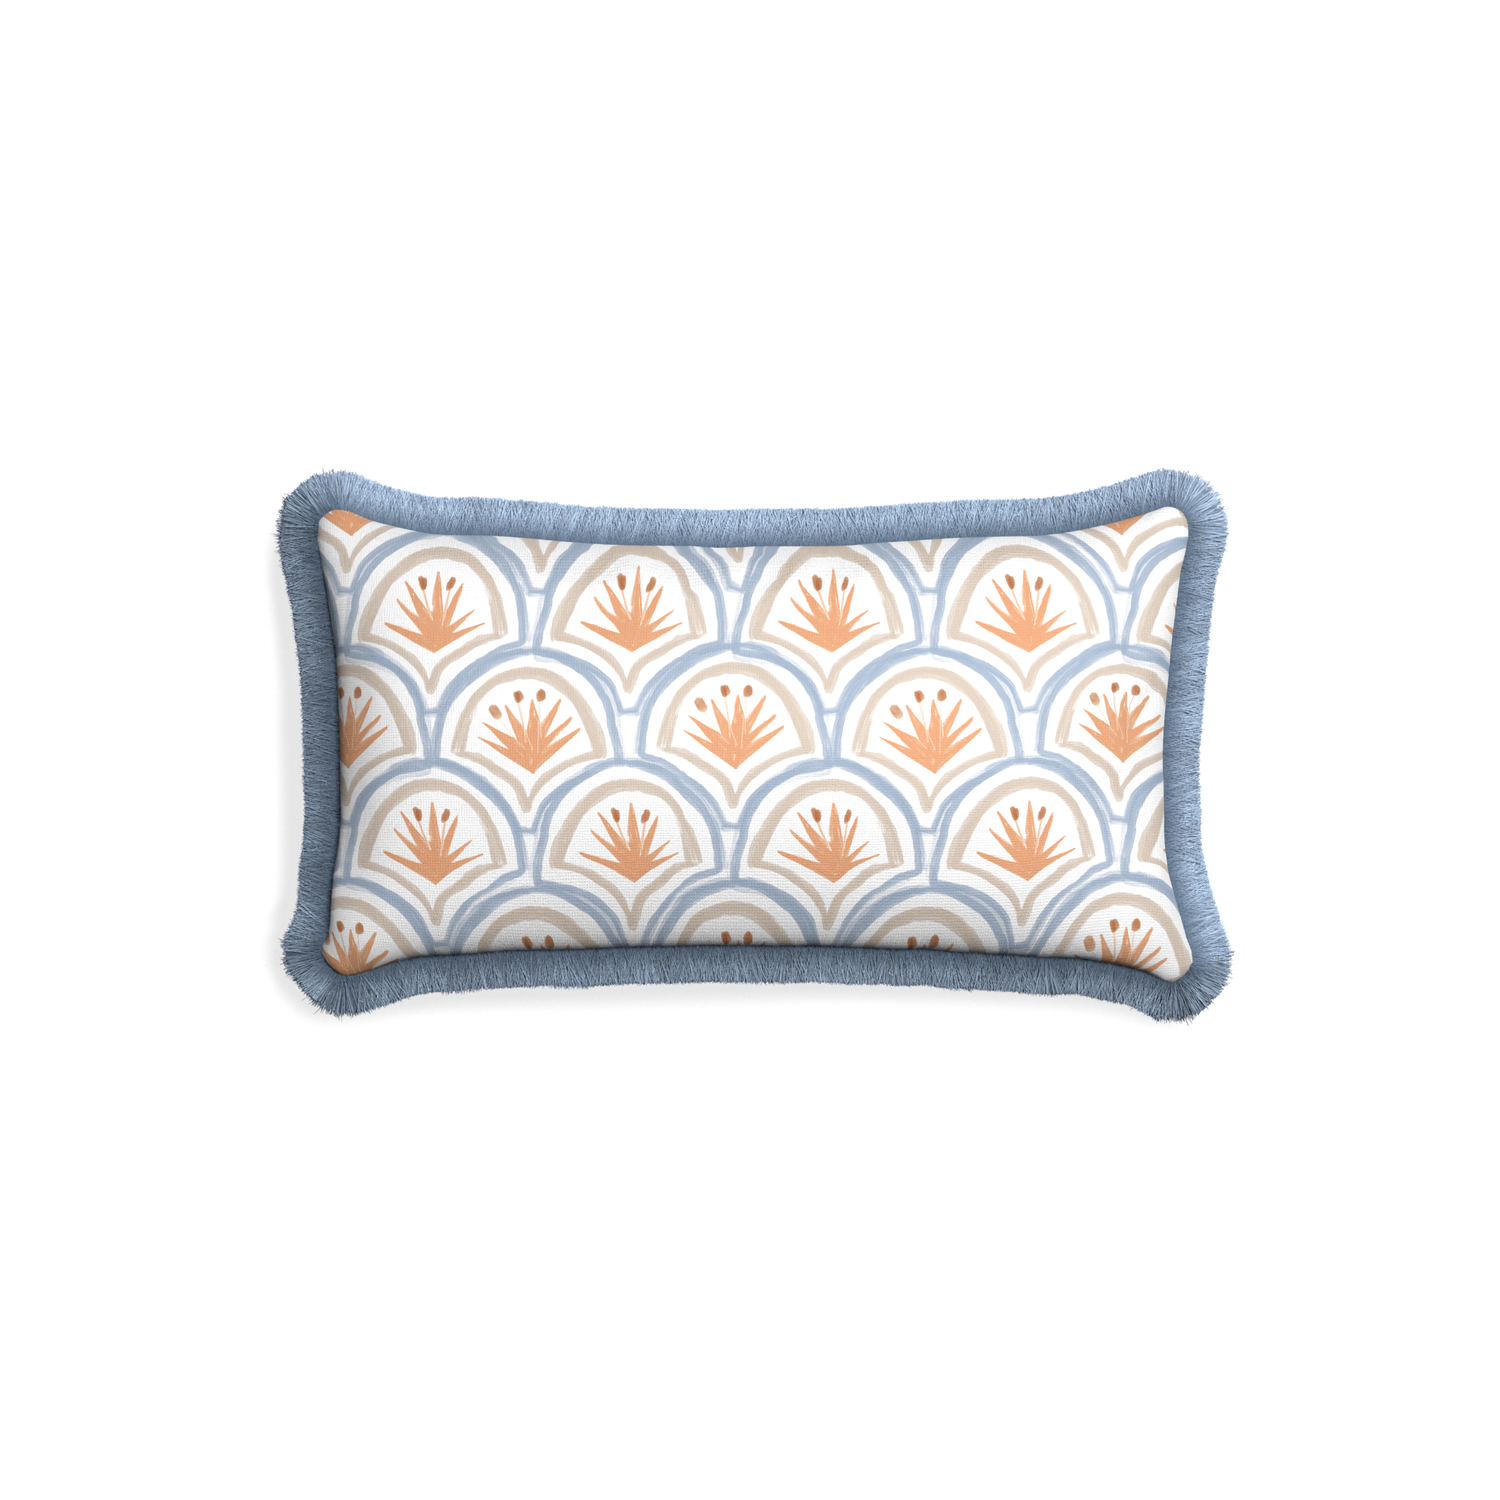 Petite-lumbar thatcher apricot custom art deco palm patternpillow with sky fringe on white background